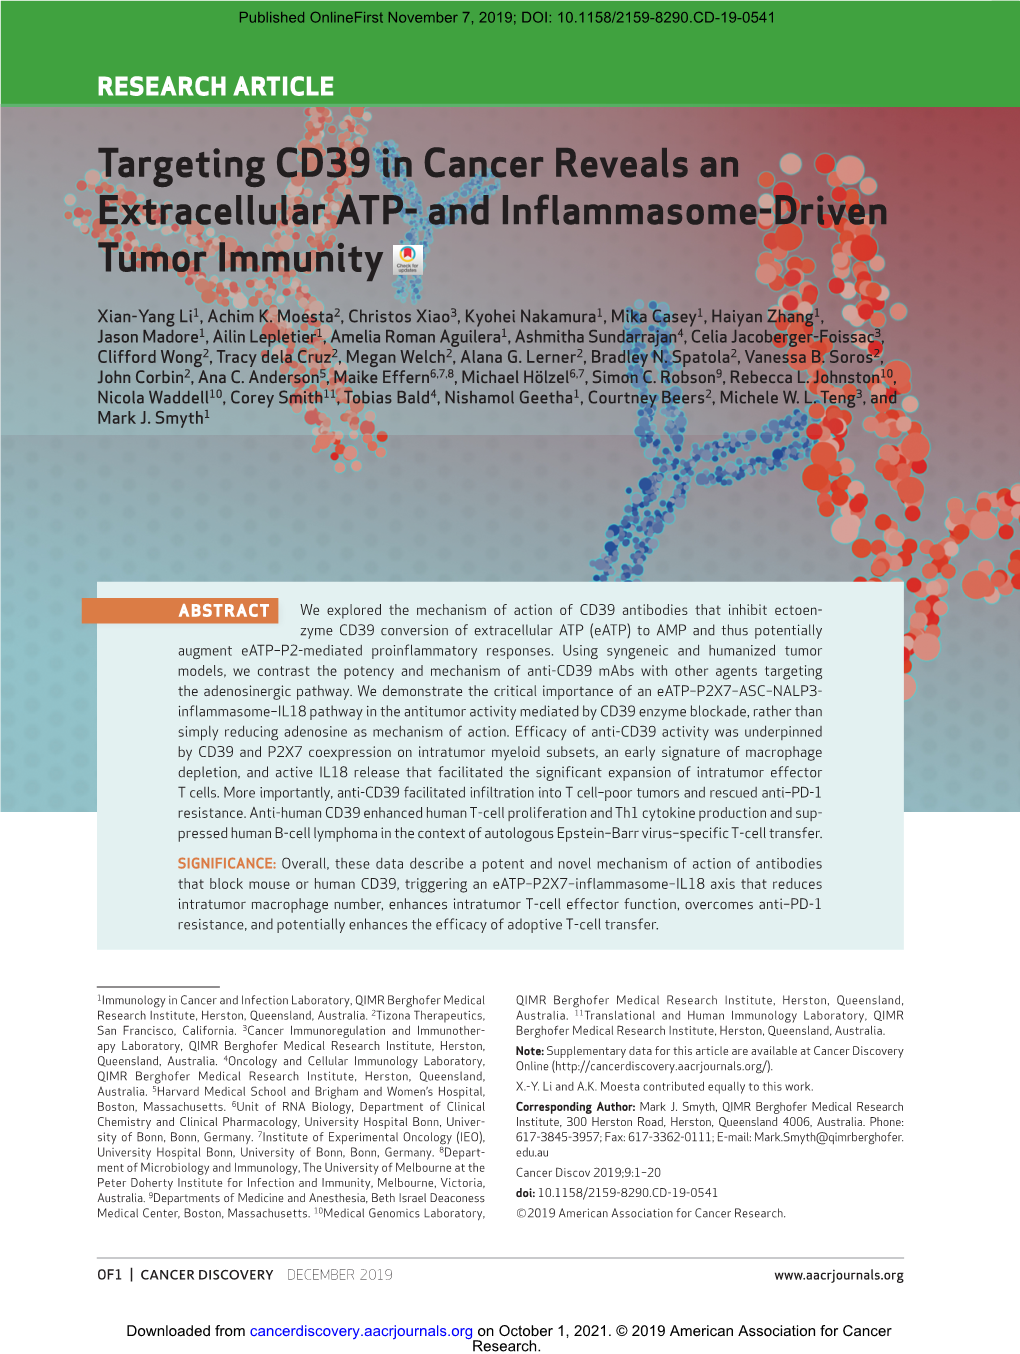 Targeting CD39 in Cancer Reveals an Extracellular ATP- and Inflammasome-Driven Tumor Immunity